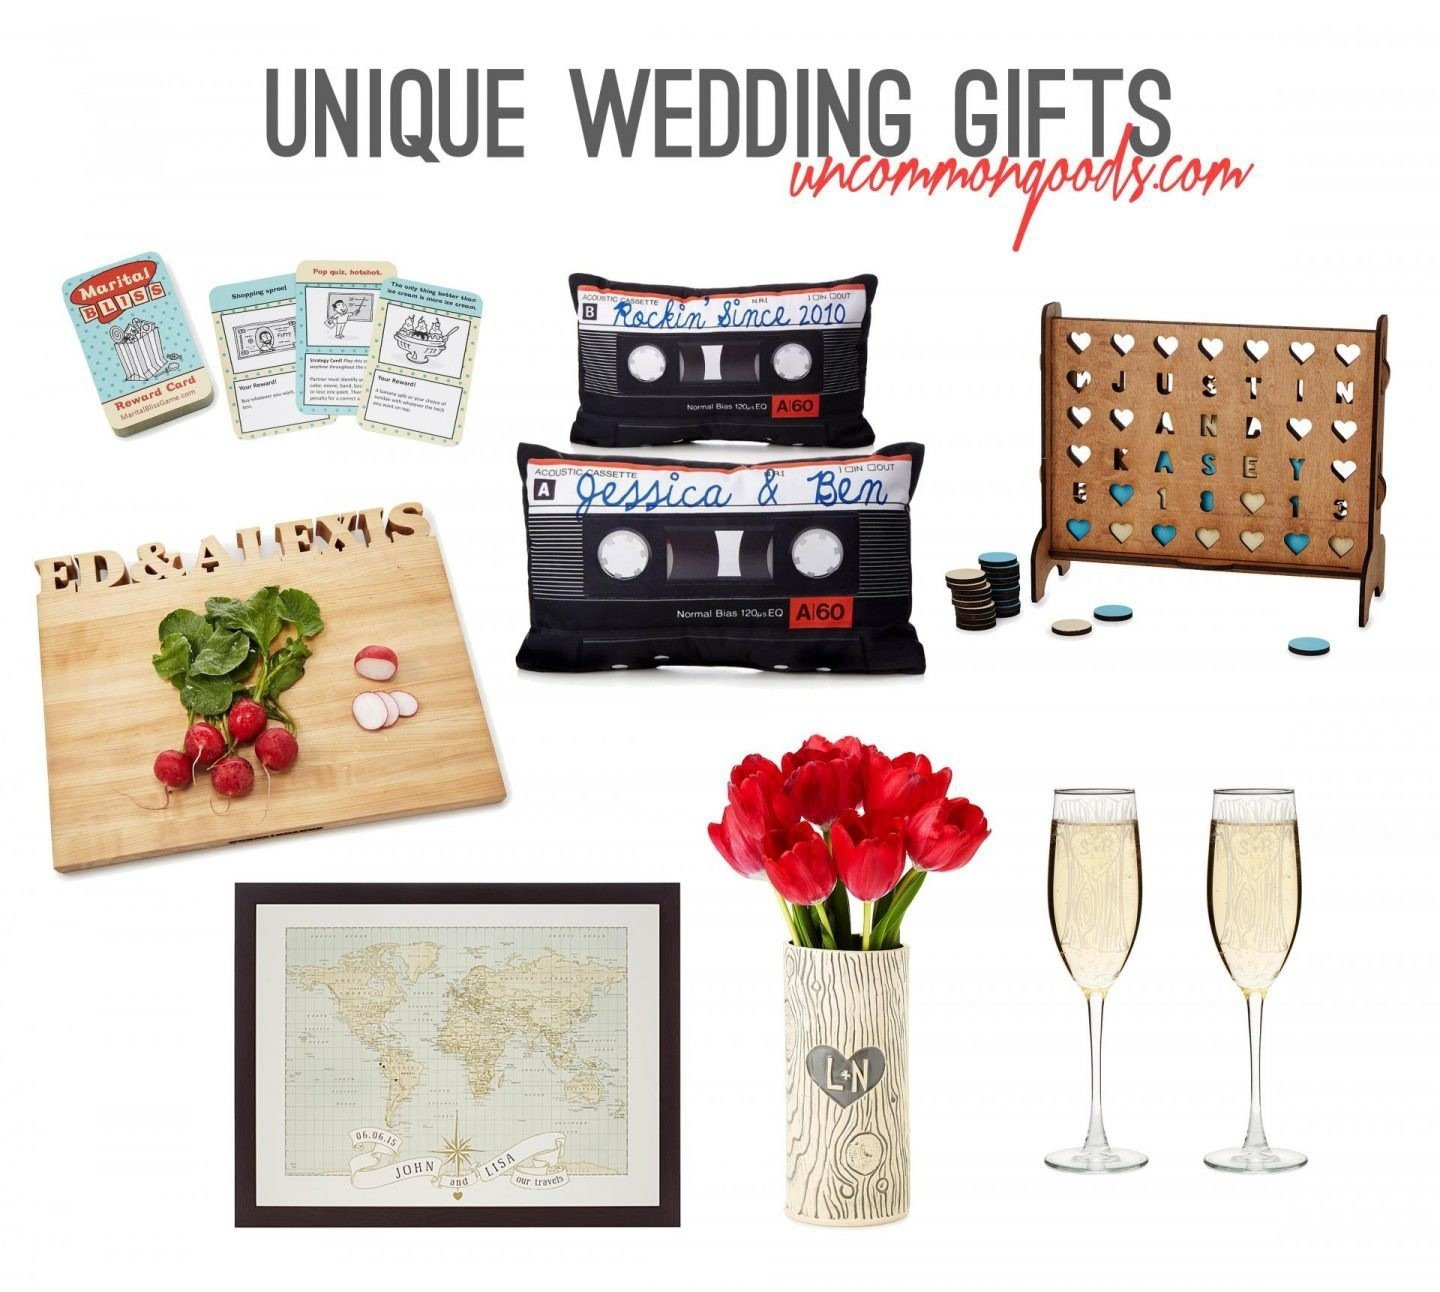 Wedding Gift Ideas For Second Marriage Older Couple
 10 Fashionable Wedding Gift Ideas For Second Marriages 2021